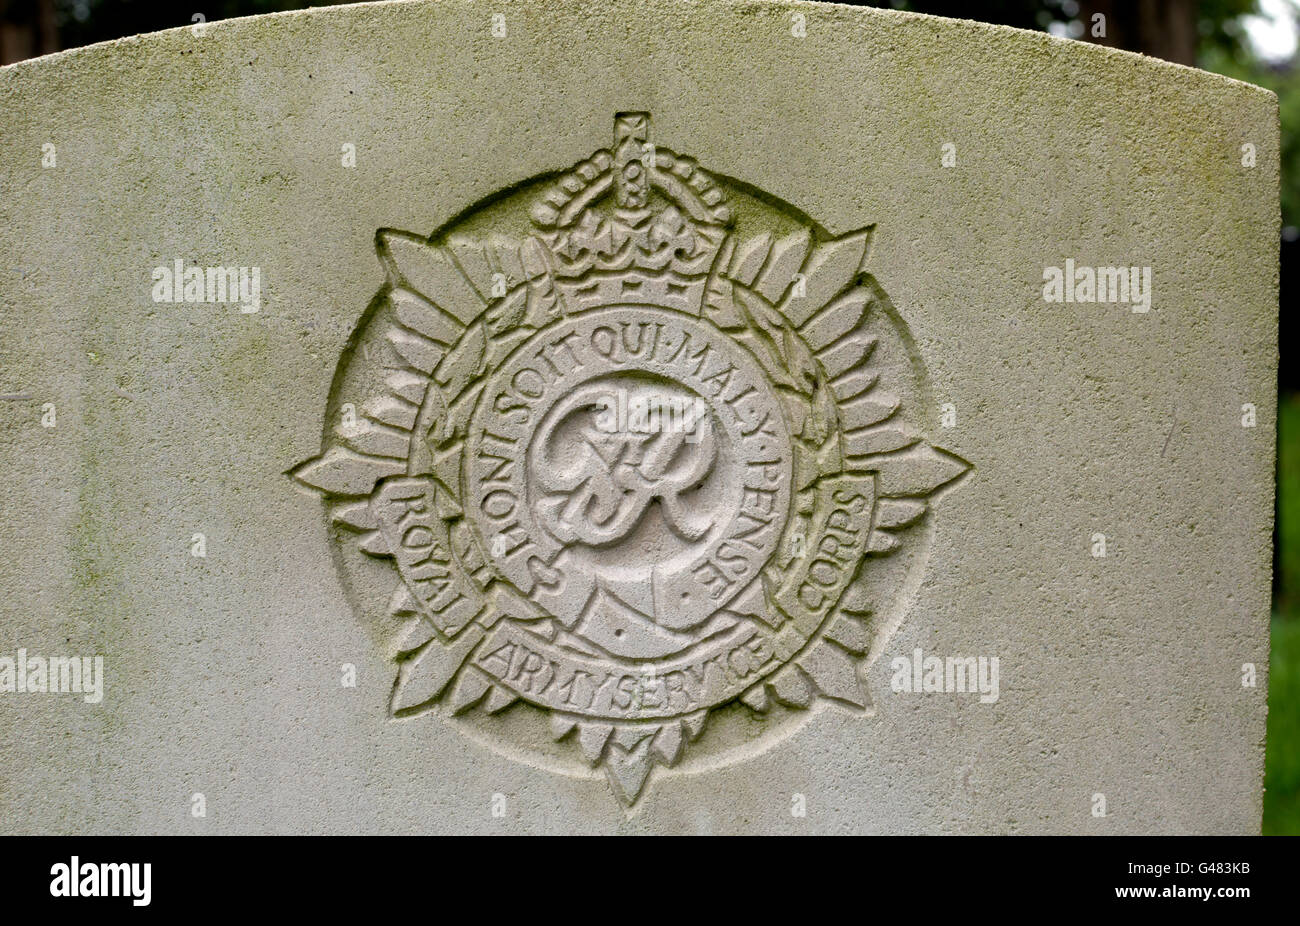 Royal Army Service Corps badge on a war grave, UK Stock Photo